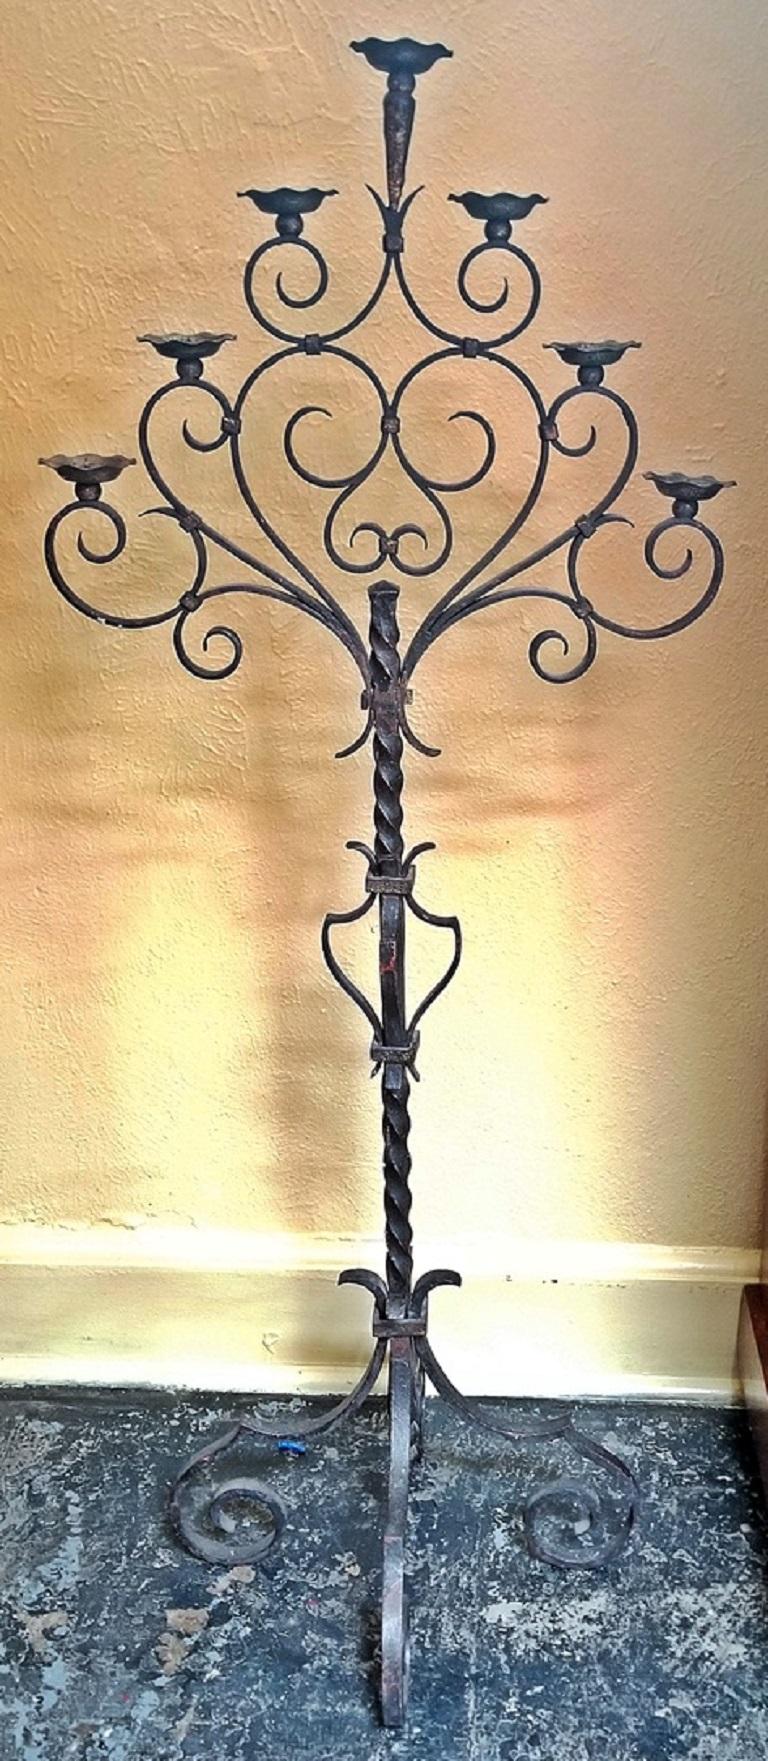 Presenting an absolutely gorgeous 18th century Spanish cast iron seven candle floor candelabra from circa 1750.
This stunning piece is elegant simplicity at it’s best with the most gorgeous natural age and patina to its surface.

It is made of